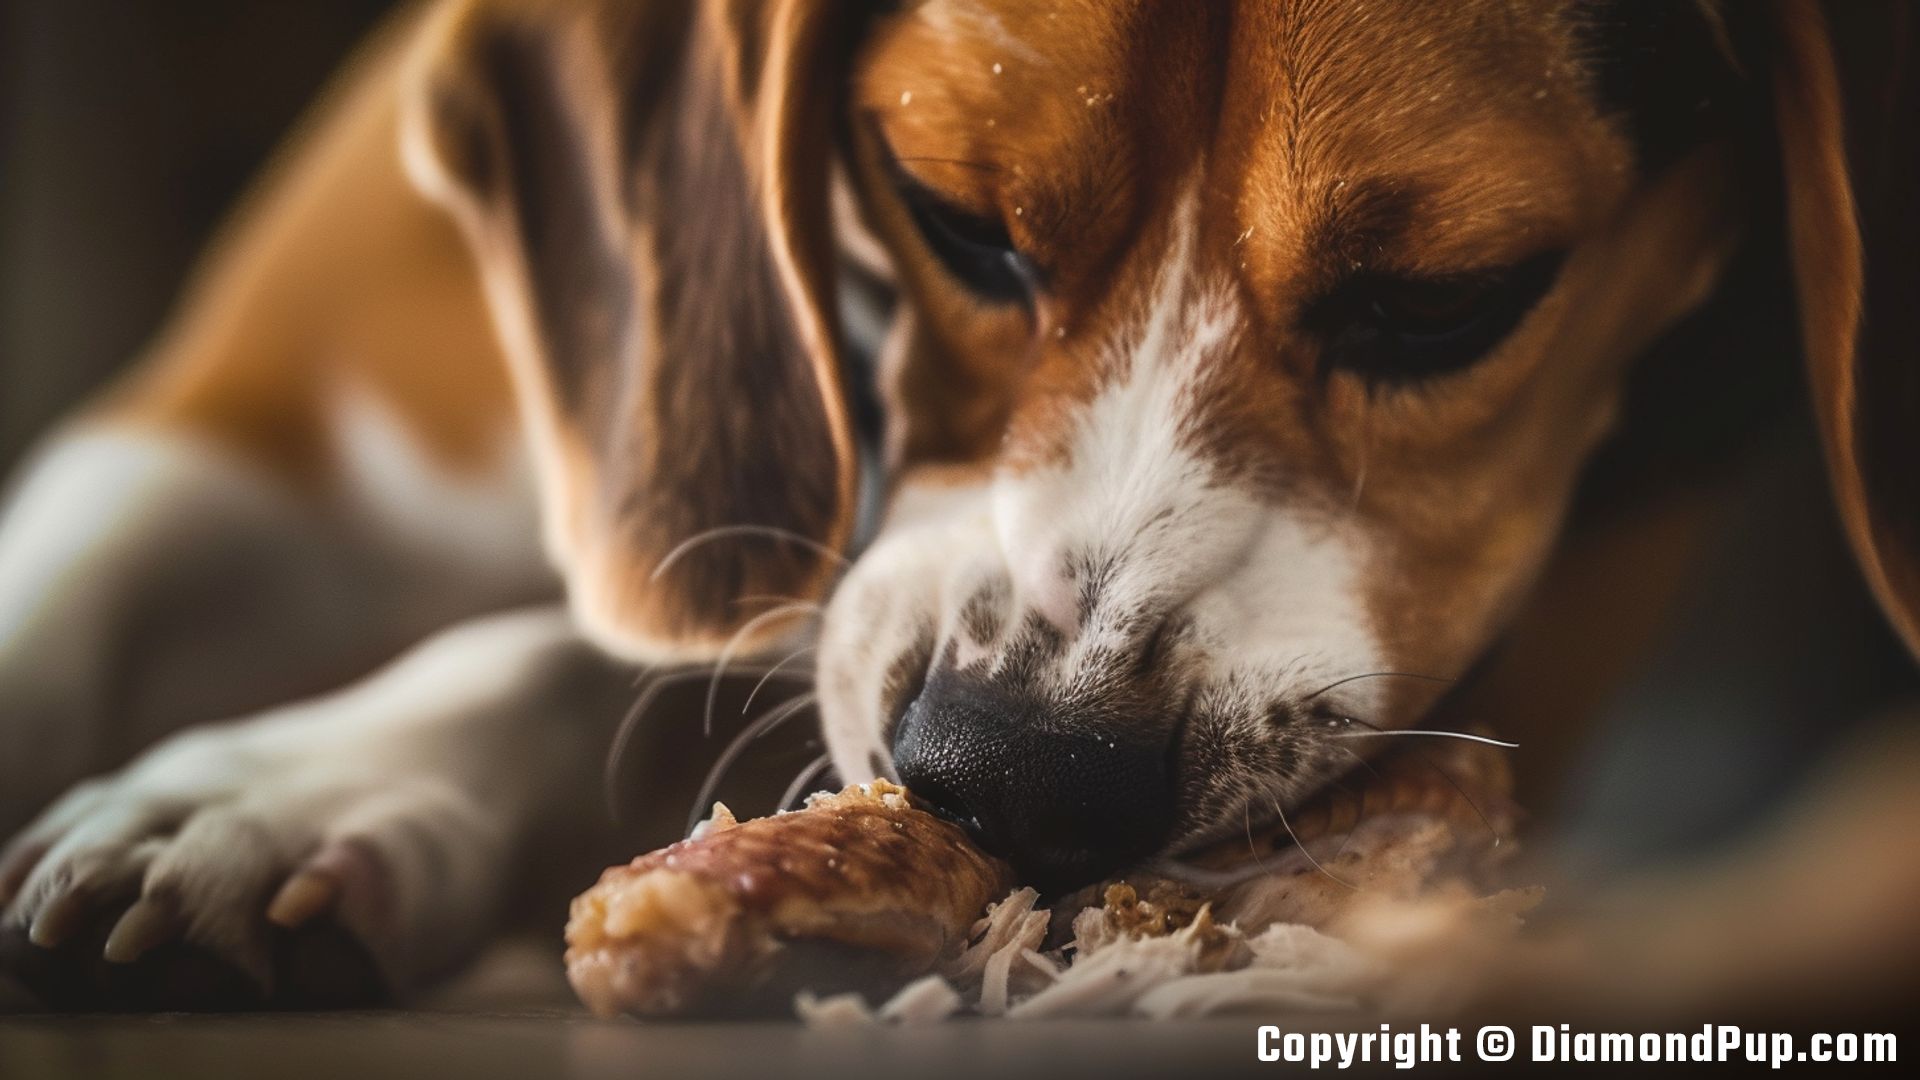 Photograph of a Happy Beagle Eating Chicken